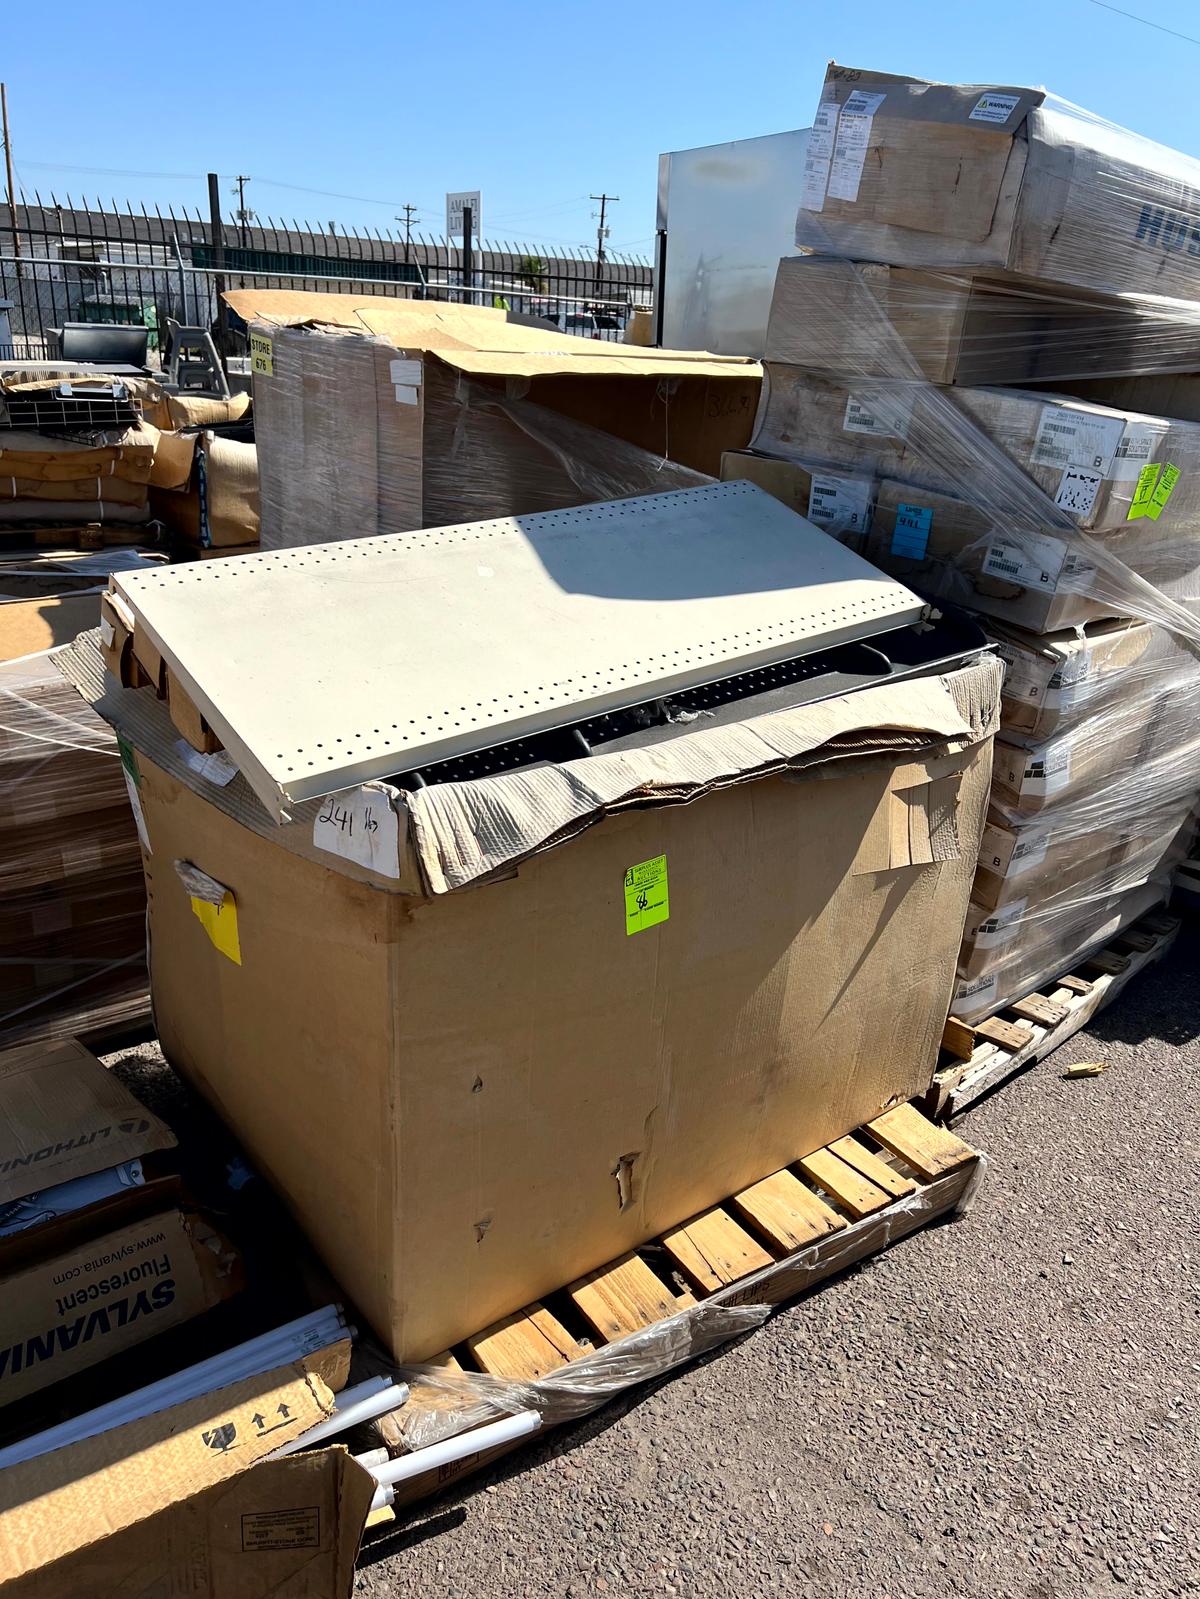 Pallet of Assorted Shelving Pieces